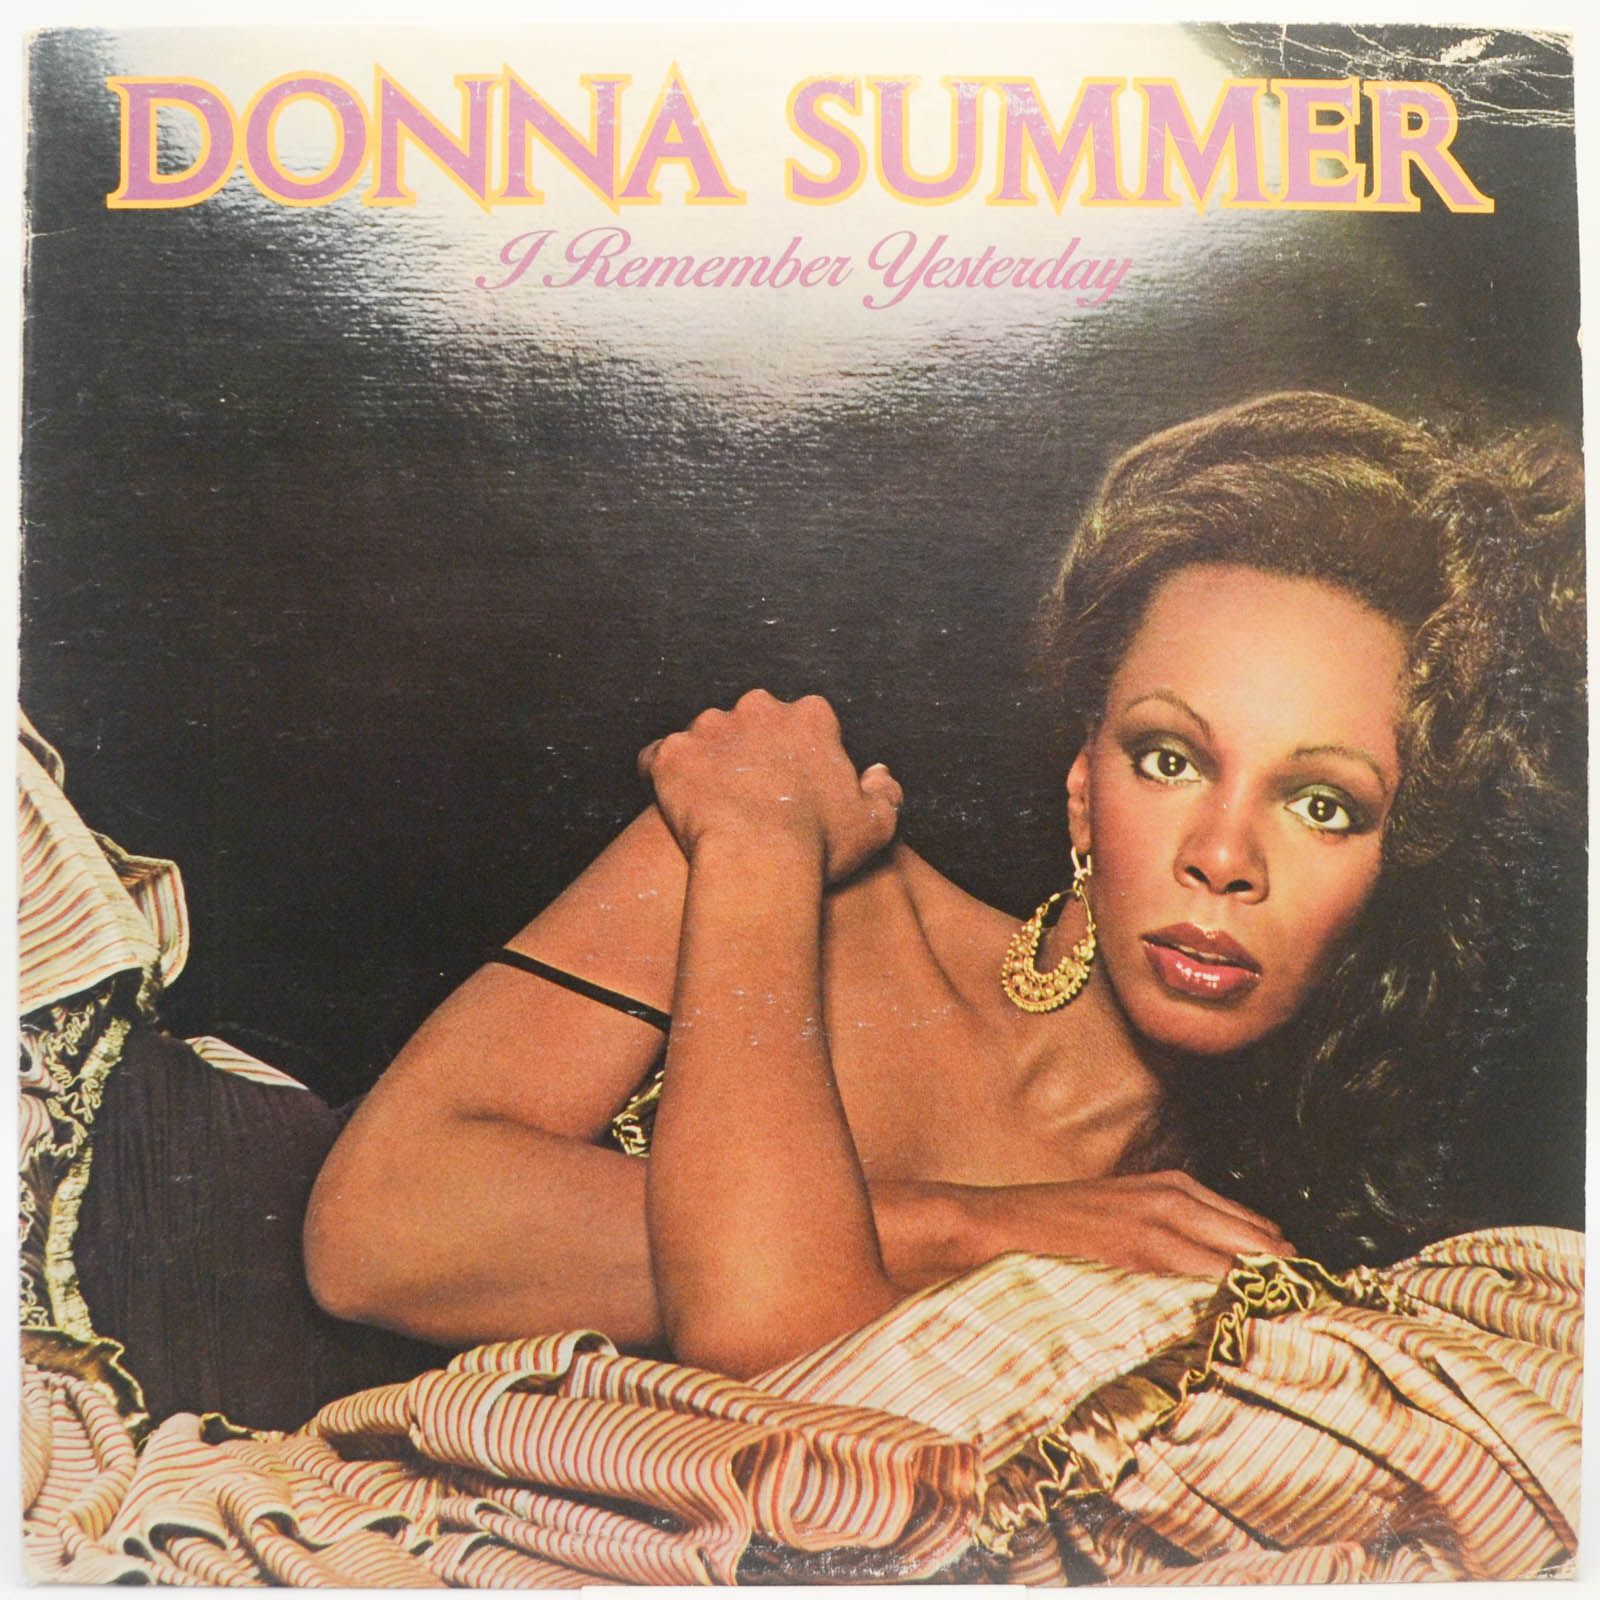 Donna Summer — I Remember Yesterday, 1977